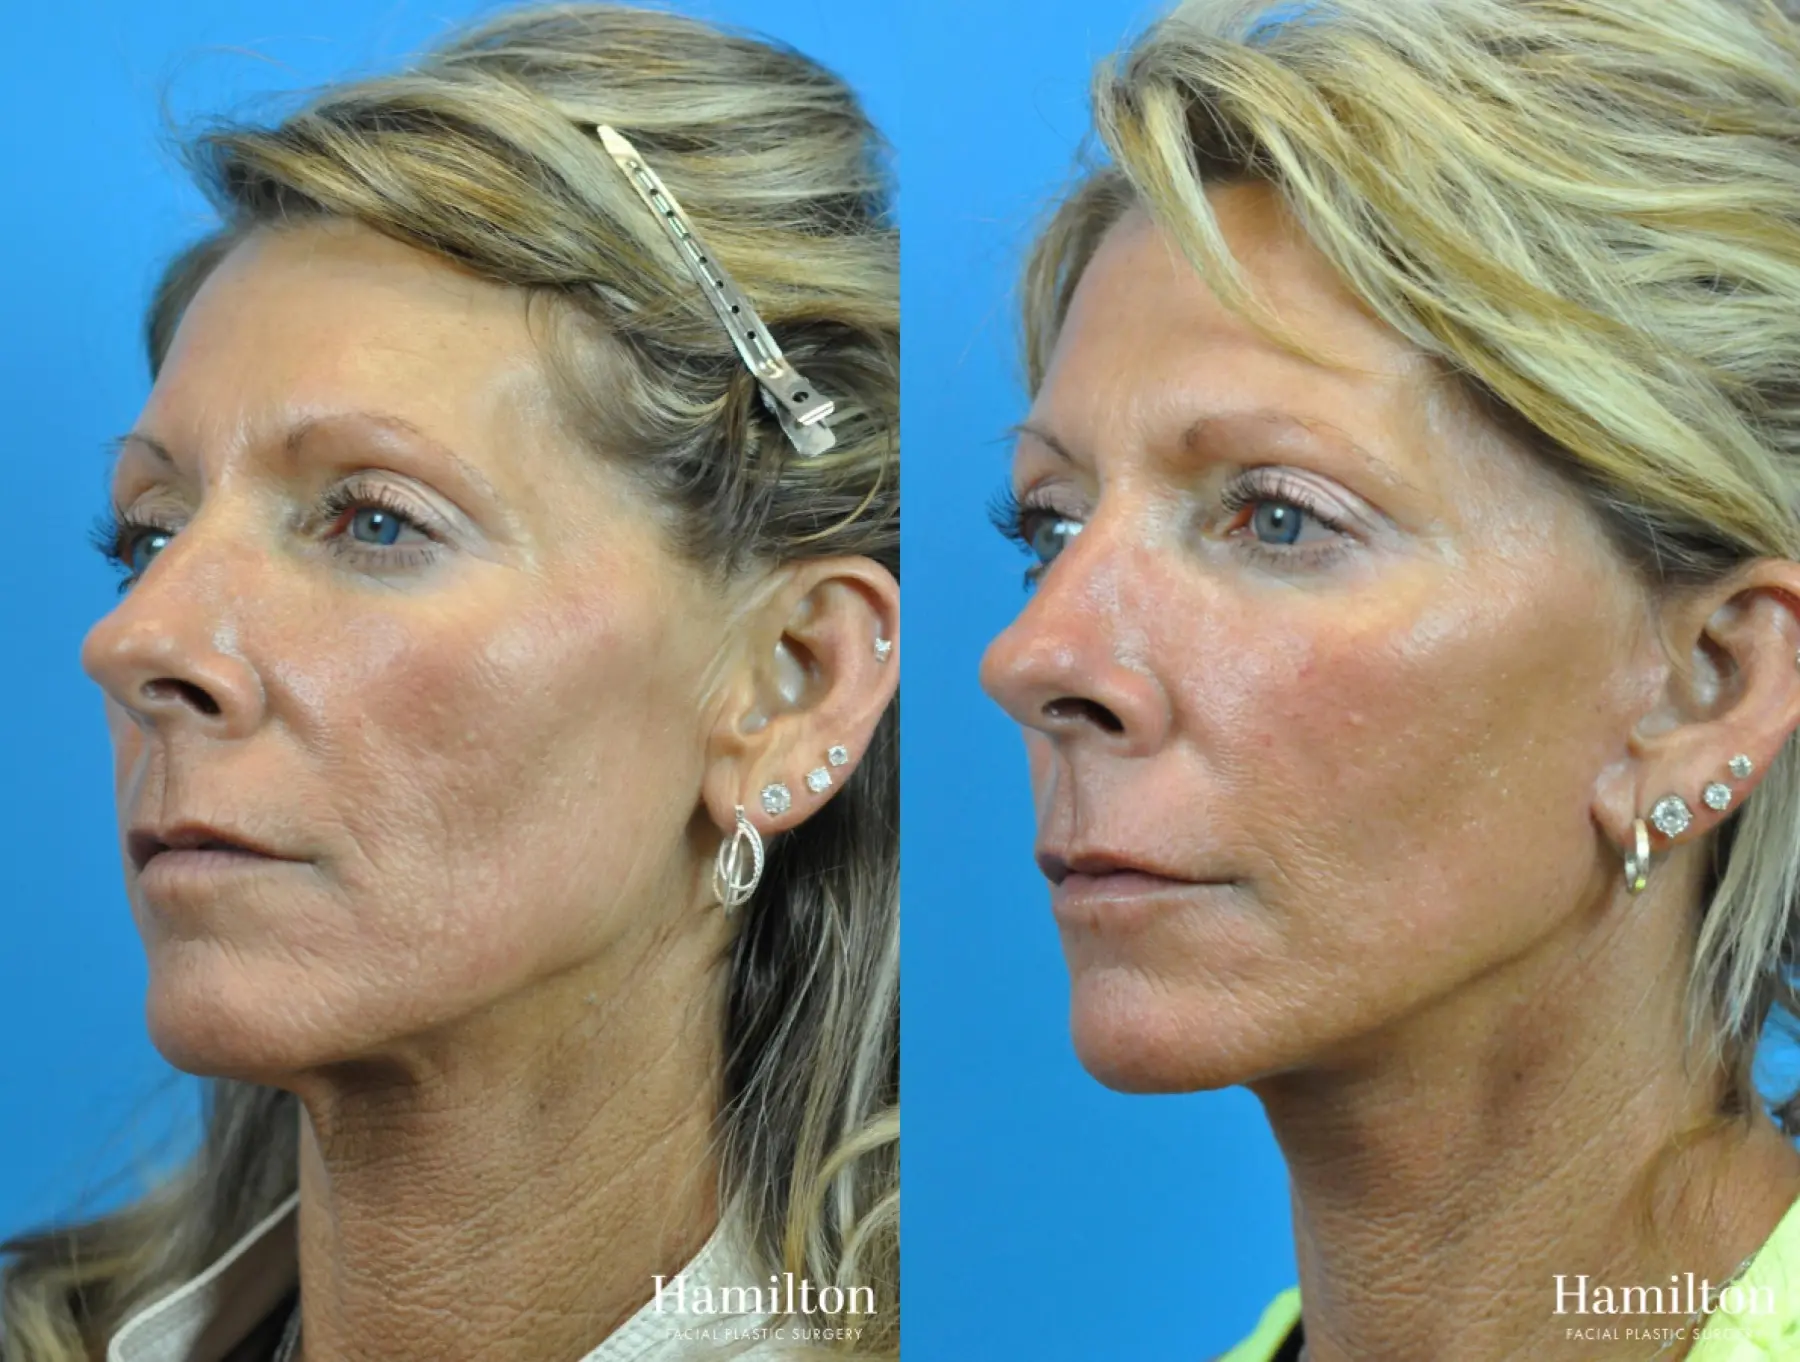 Fractional Resurfacing: Patient 2 - Before and After  